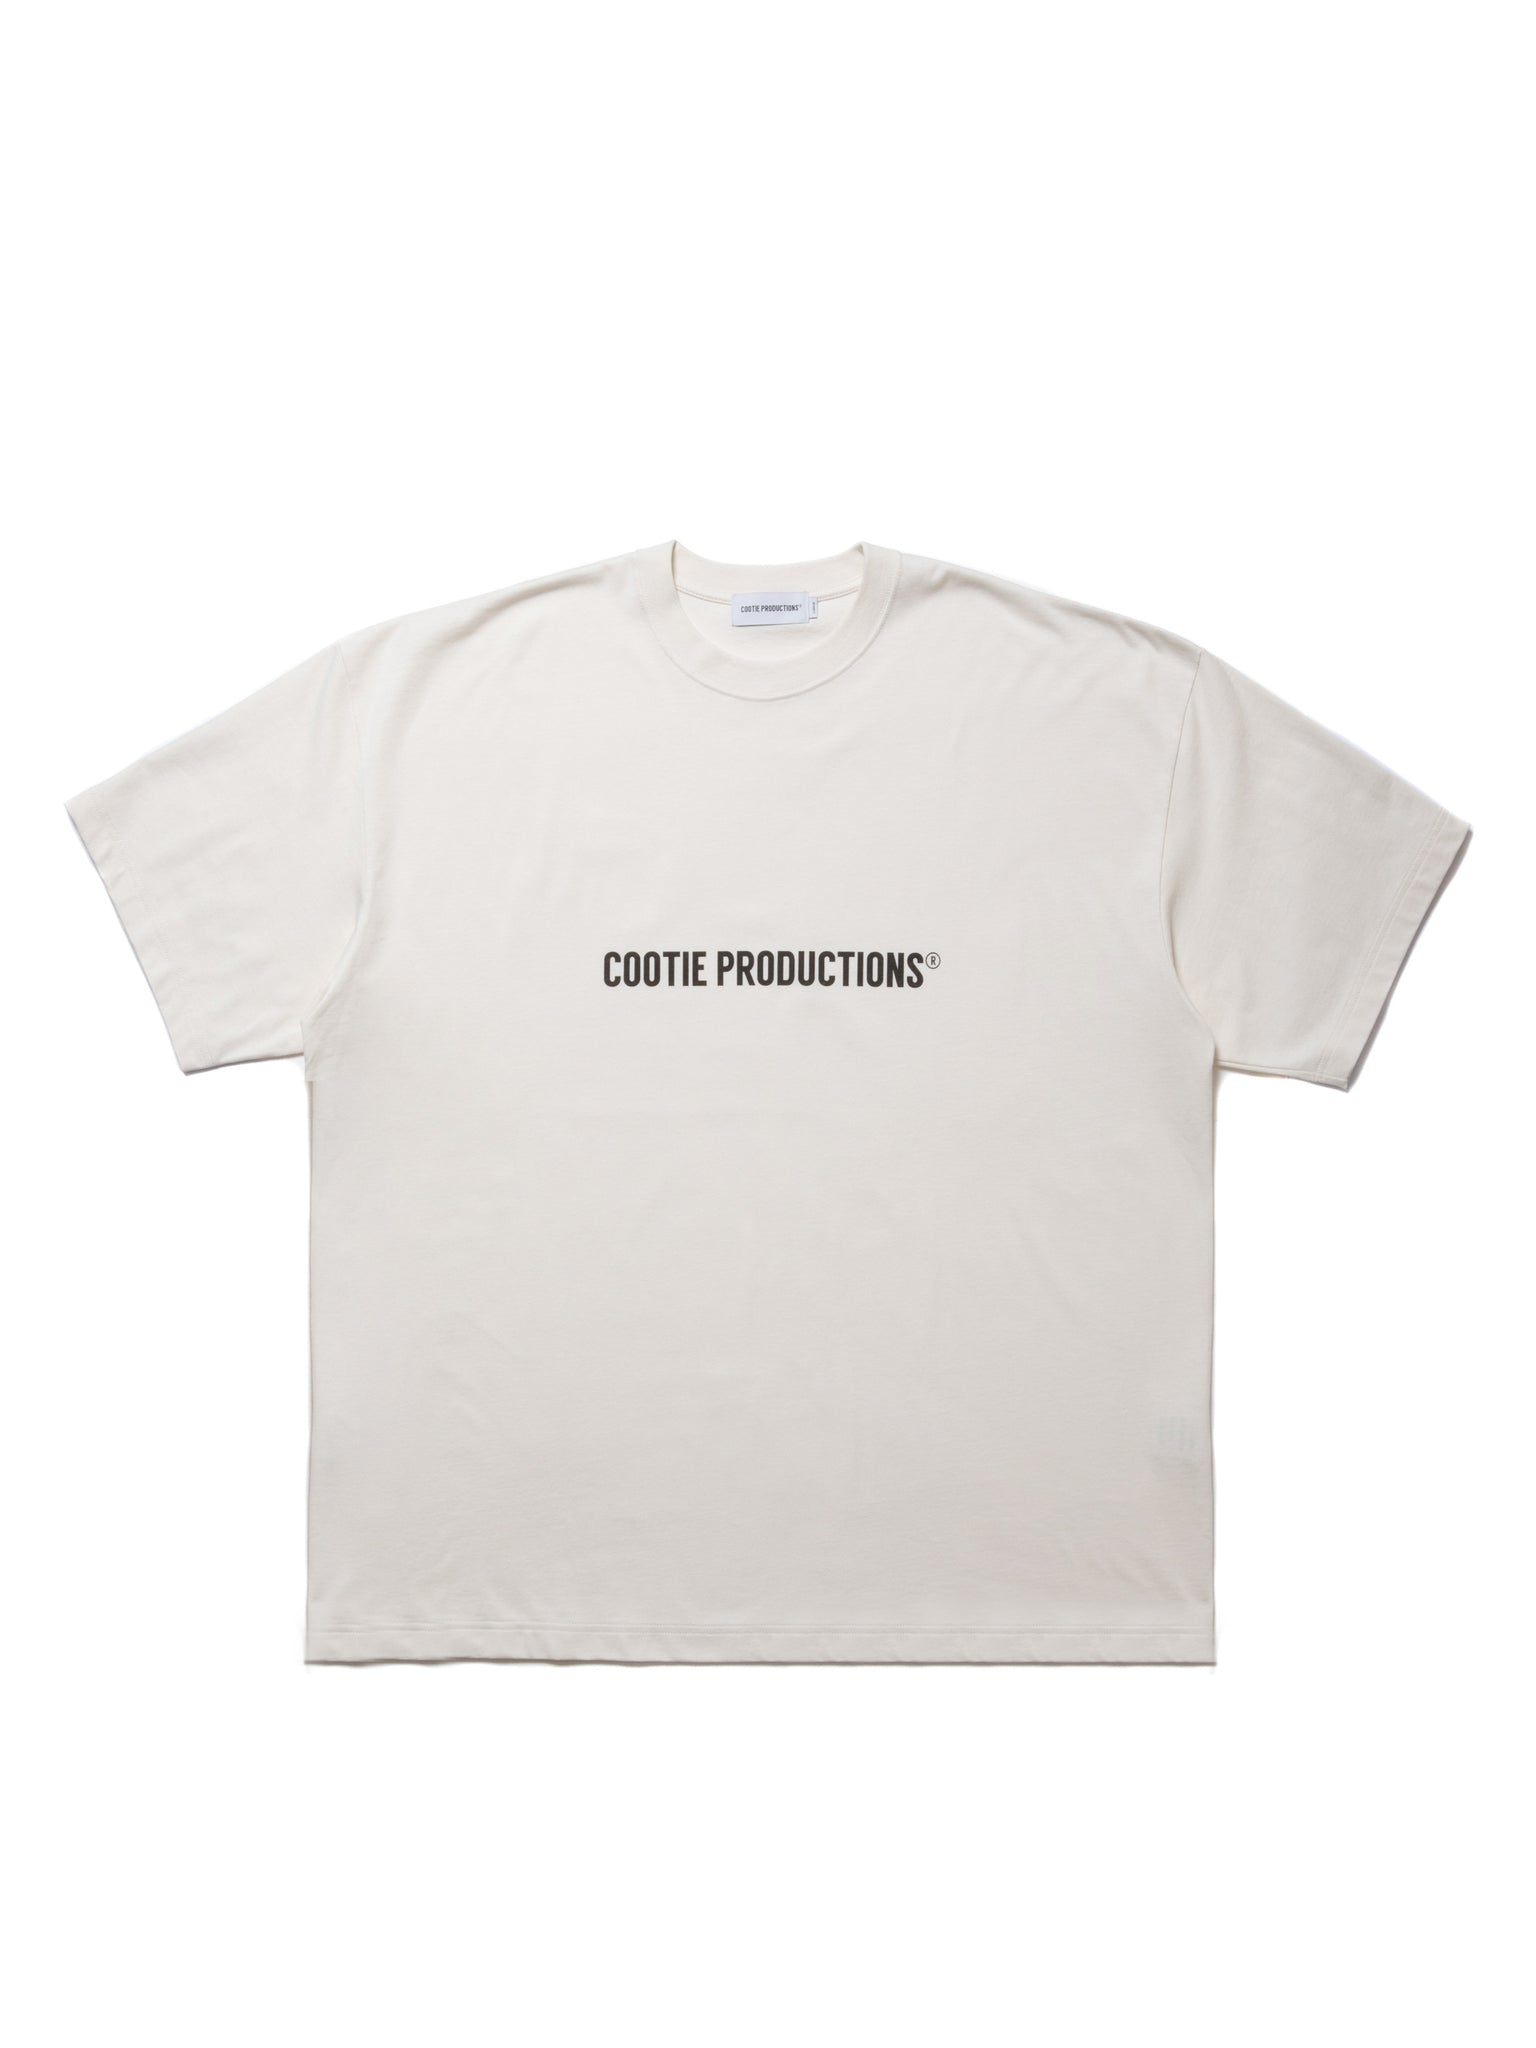 ALL ITEMS – COOTIE PRODUCTIONS